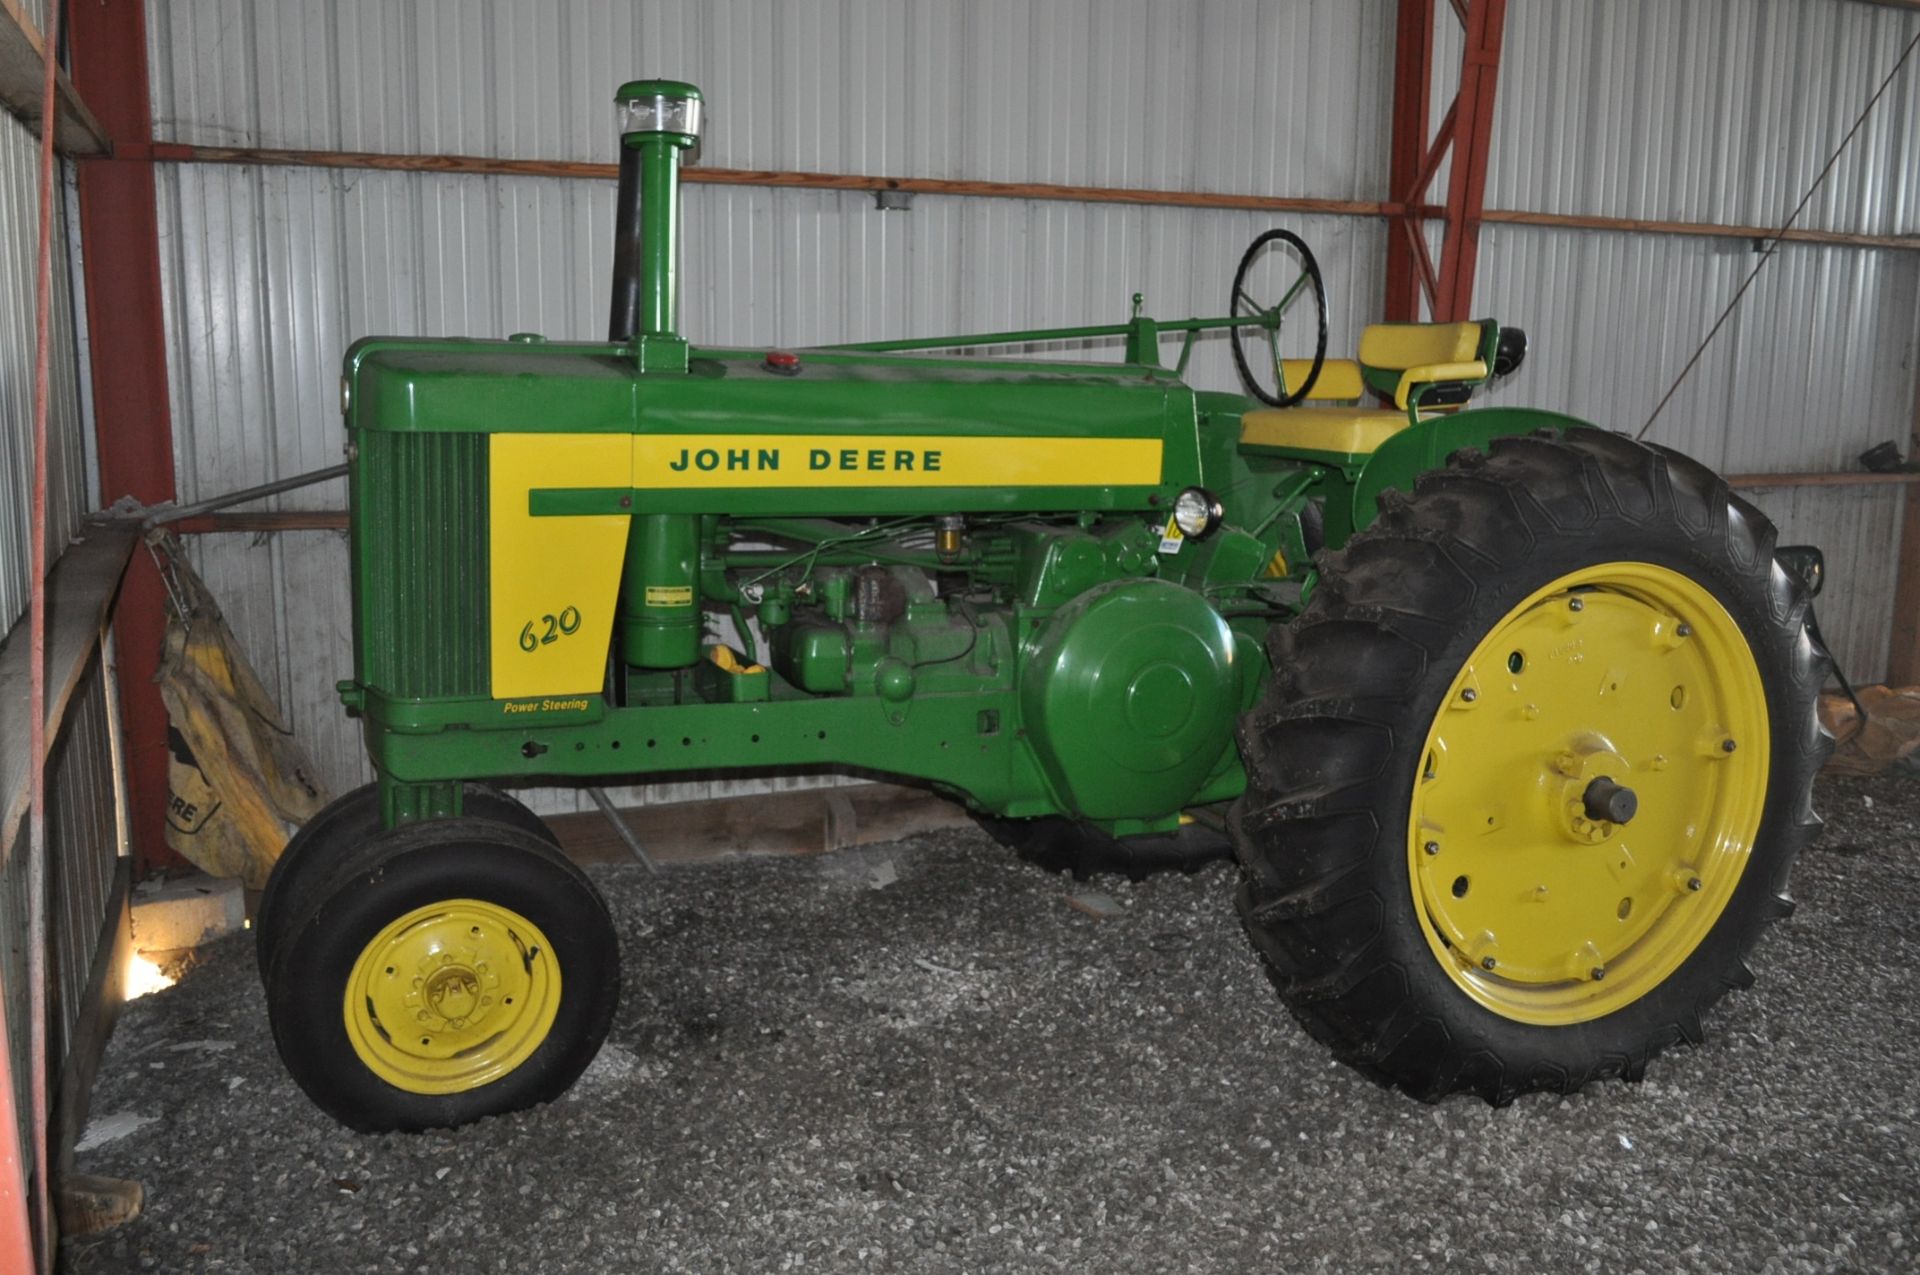 John Deere 620 Tractor, power steering, 3 pt with missing top link and lower arms, Pto, 1 hyd